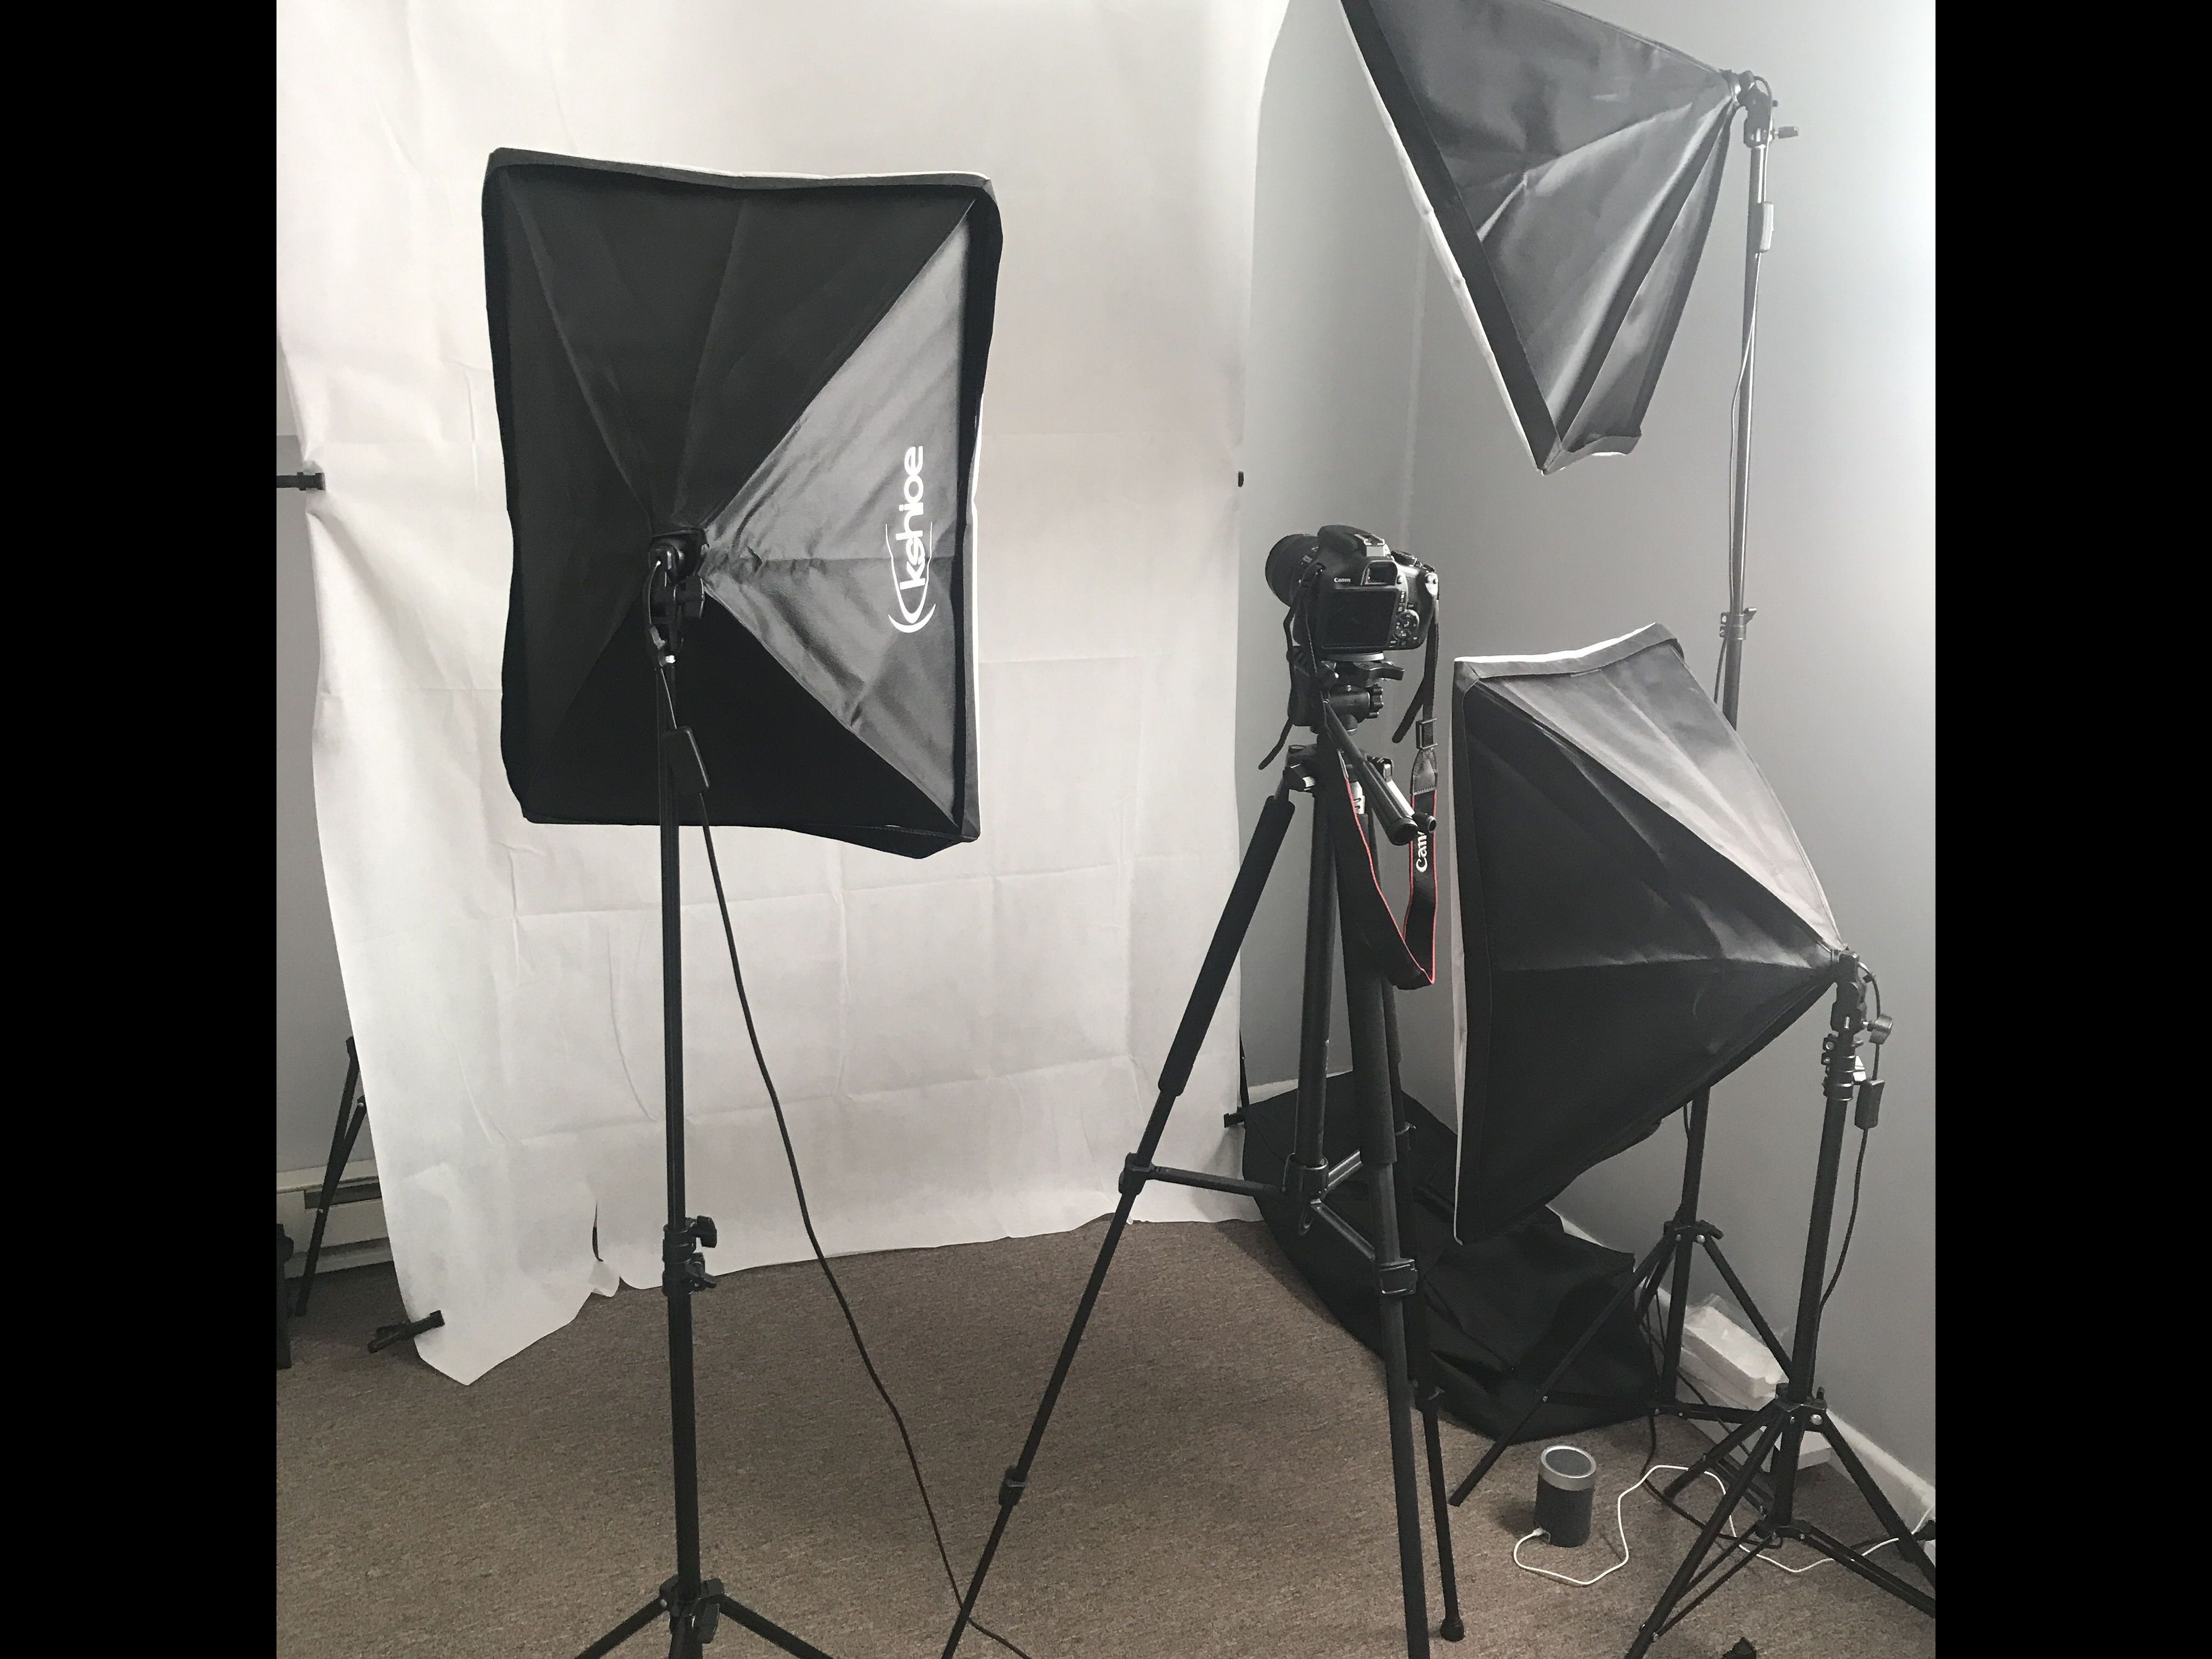 Umbrella Softbox Set Continuous Lighting with 6.5ftx9.8ft Background Stand Backdrop Support System for Photo Studio Product Portrait and Video Shooting Kshioe Photography Lighting Kit 